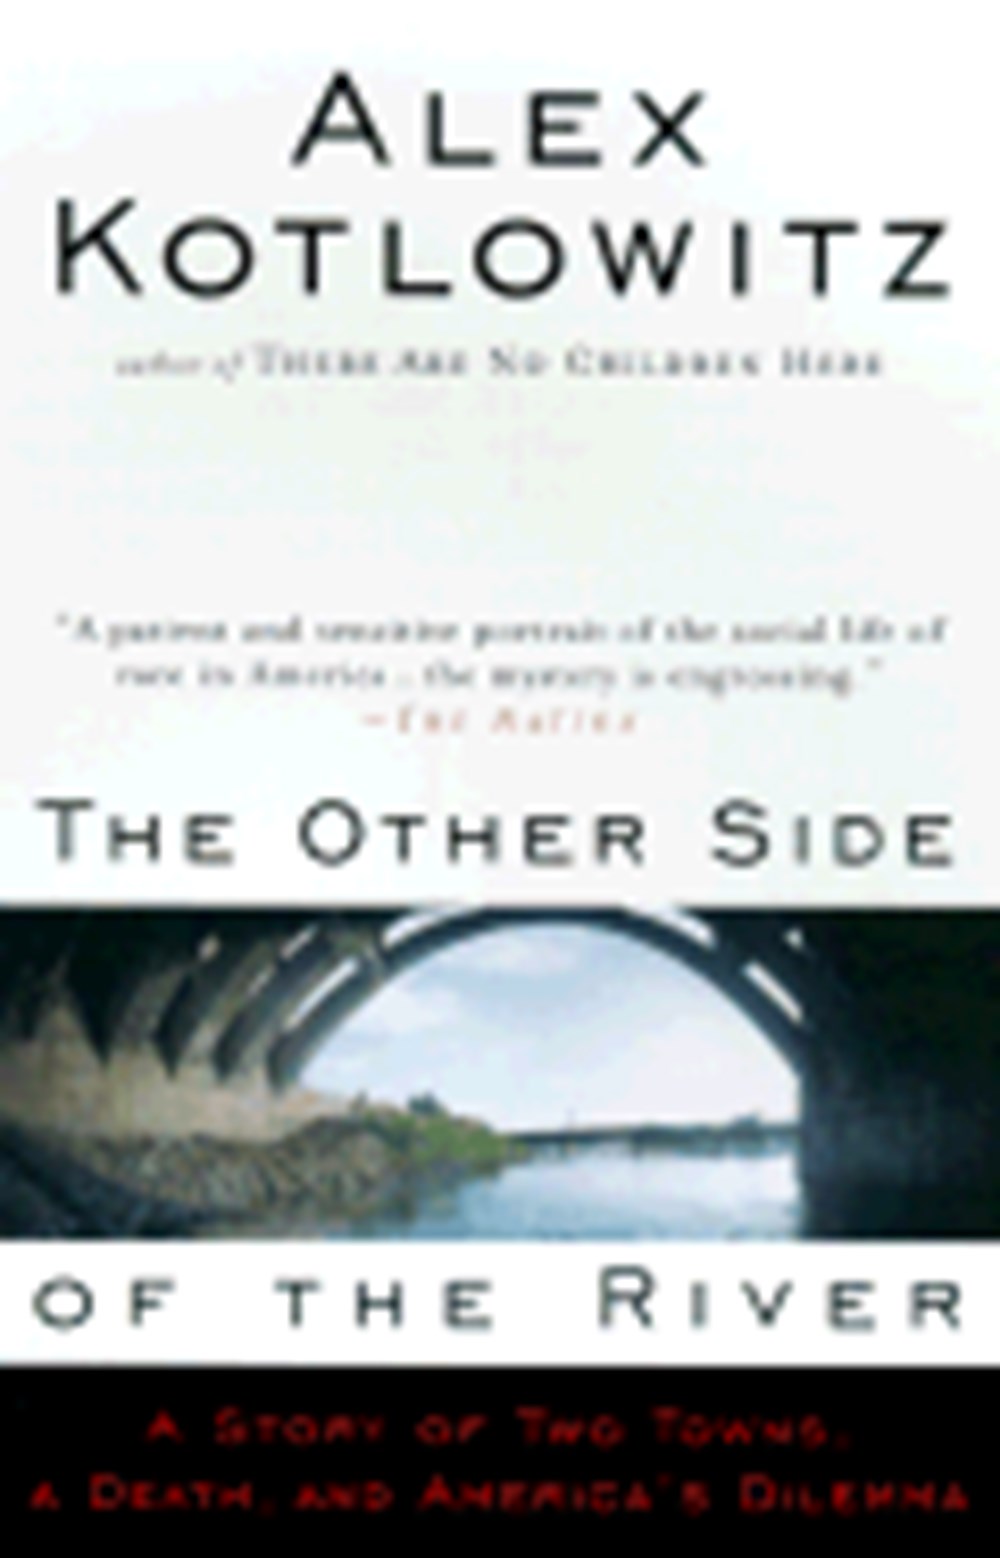 Other Side of the River: A Story of Two Towns, a Death, and America's Dilemma